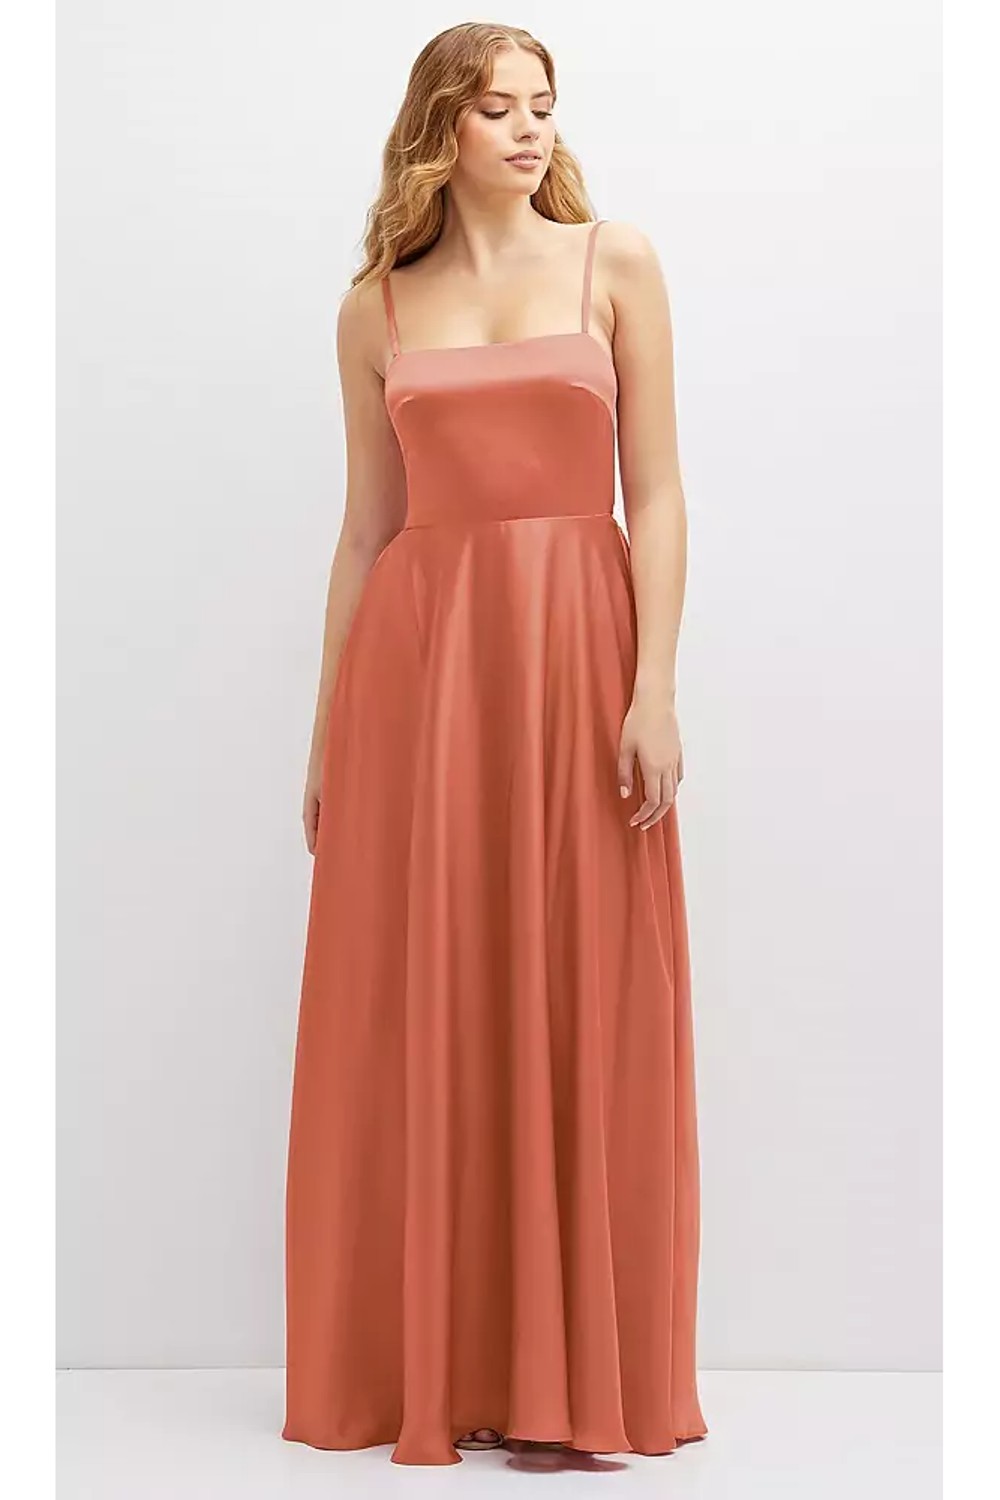 Try Before You Buy Stevie Bridesmaid Dress by Dessy